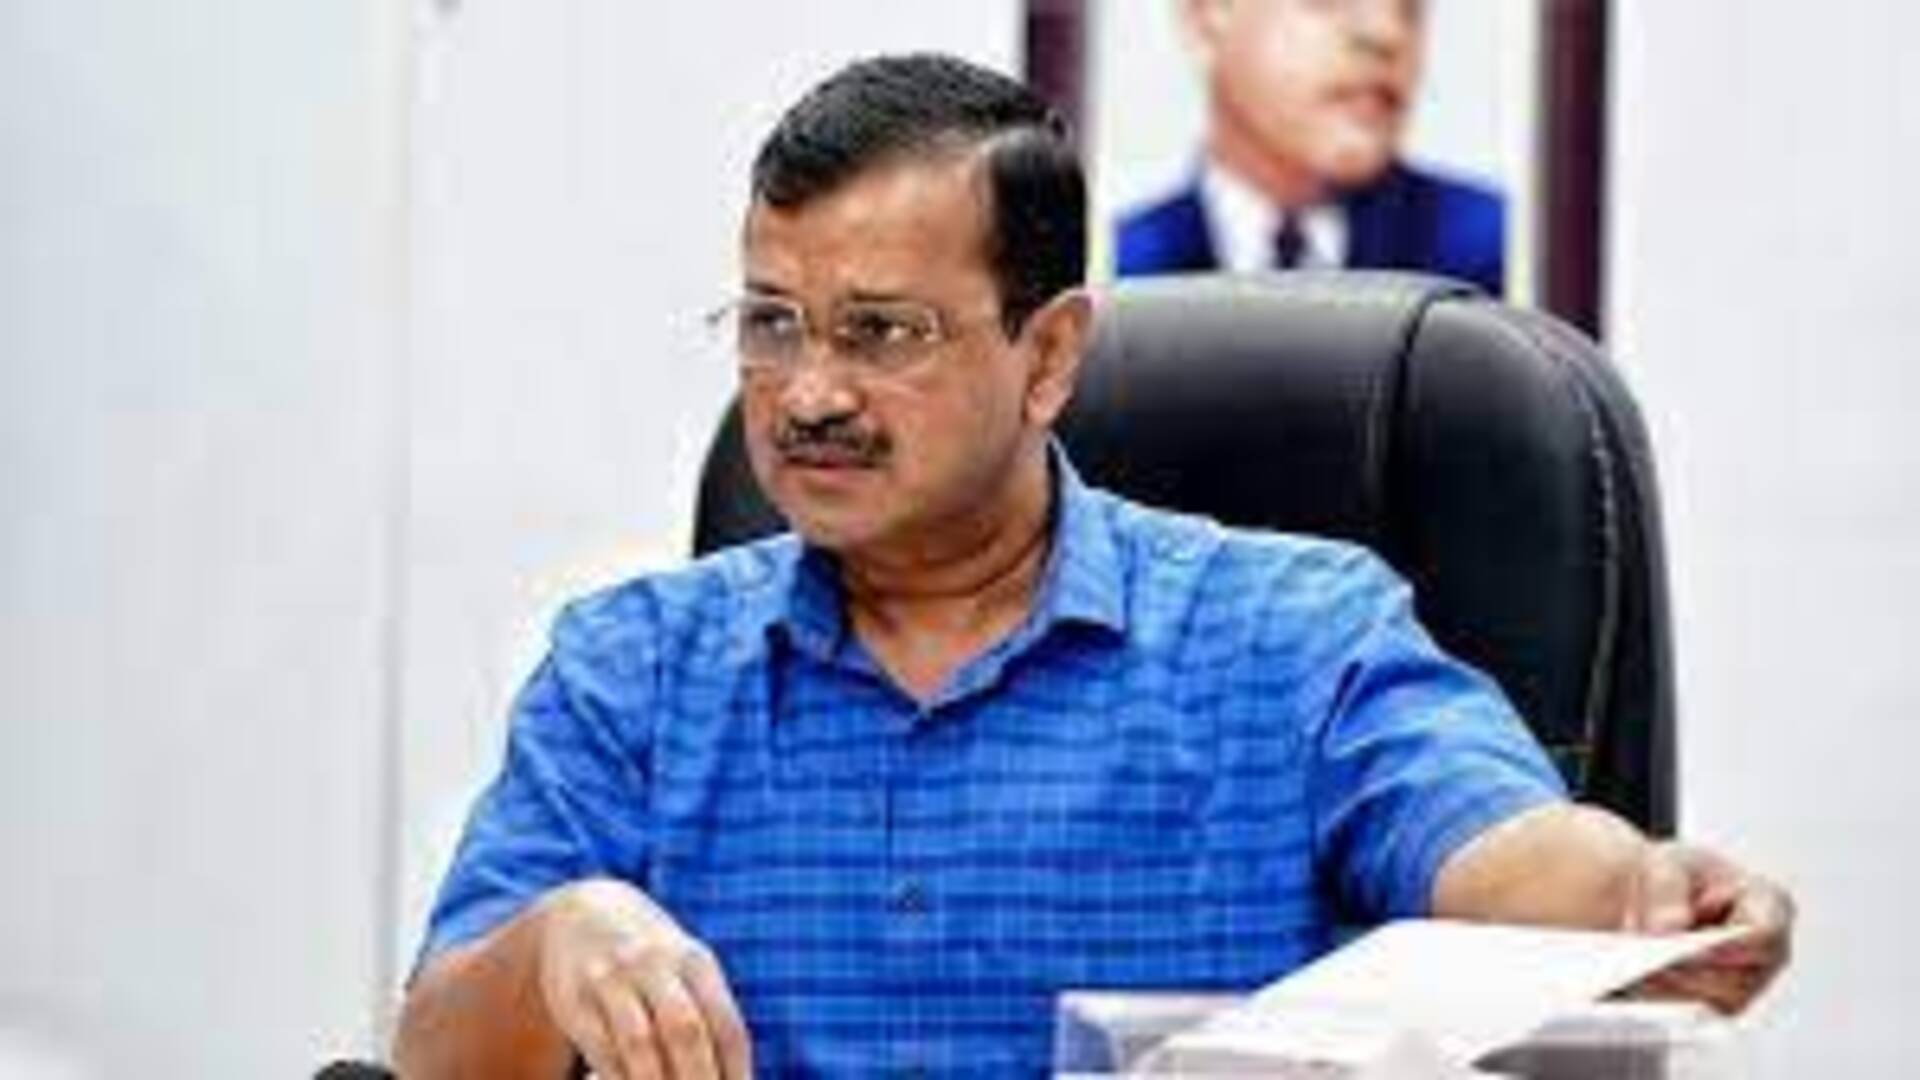 Section 174 Filed Against Kejriwal After He Skips Summons